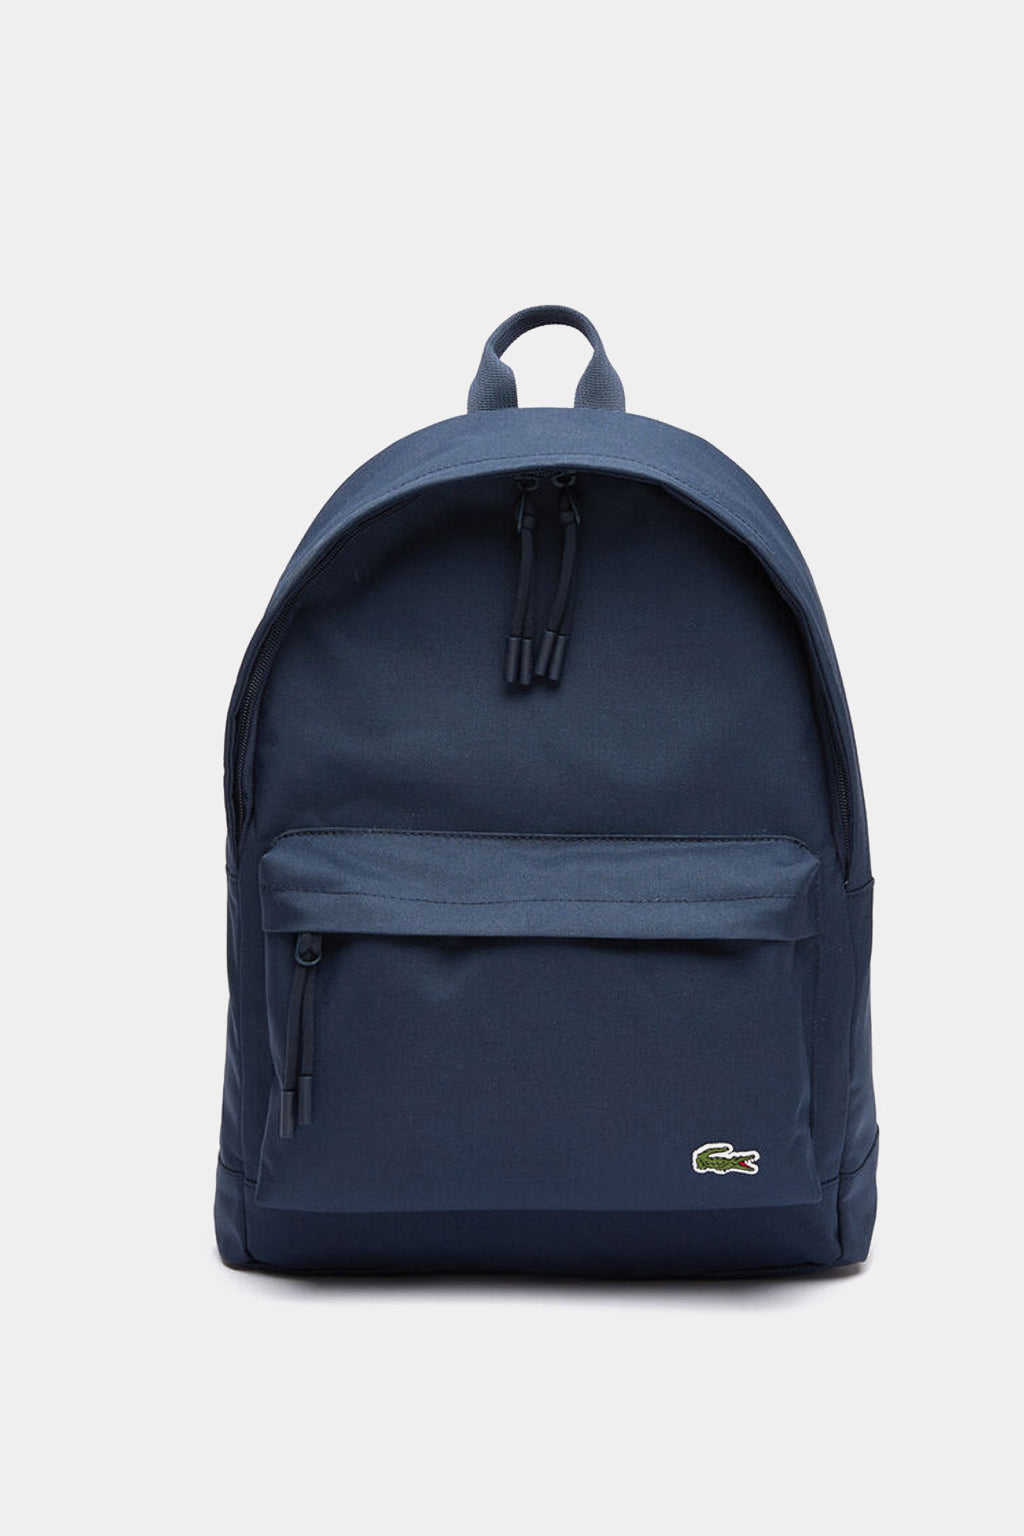 Lacoste - Unisex Computer Compartment Backpack